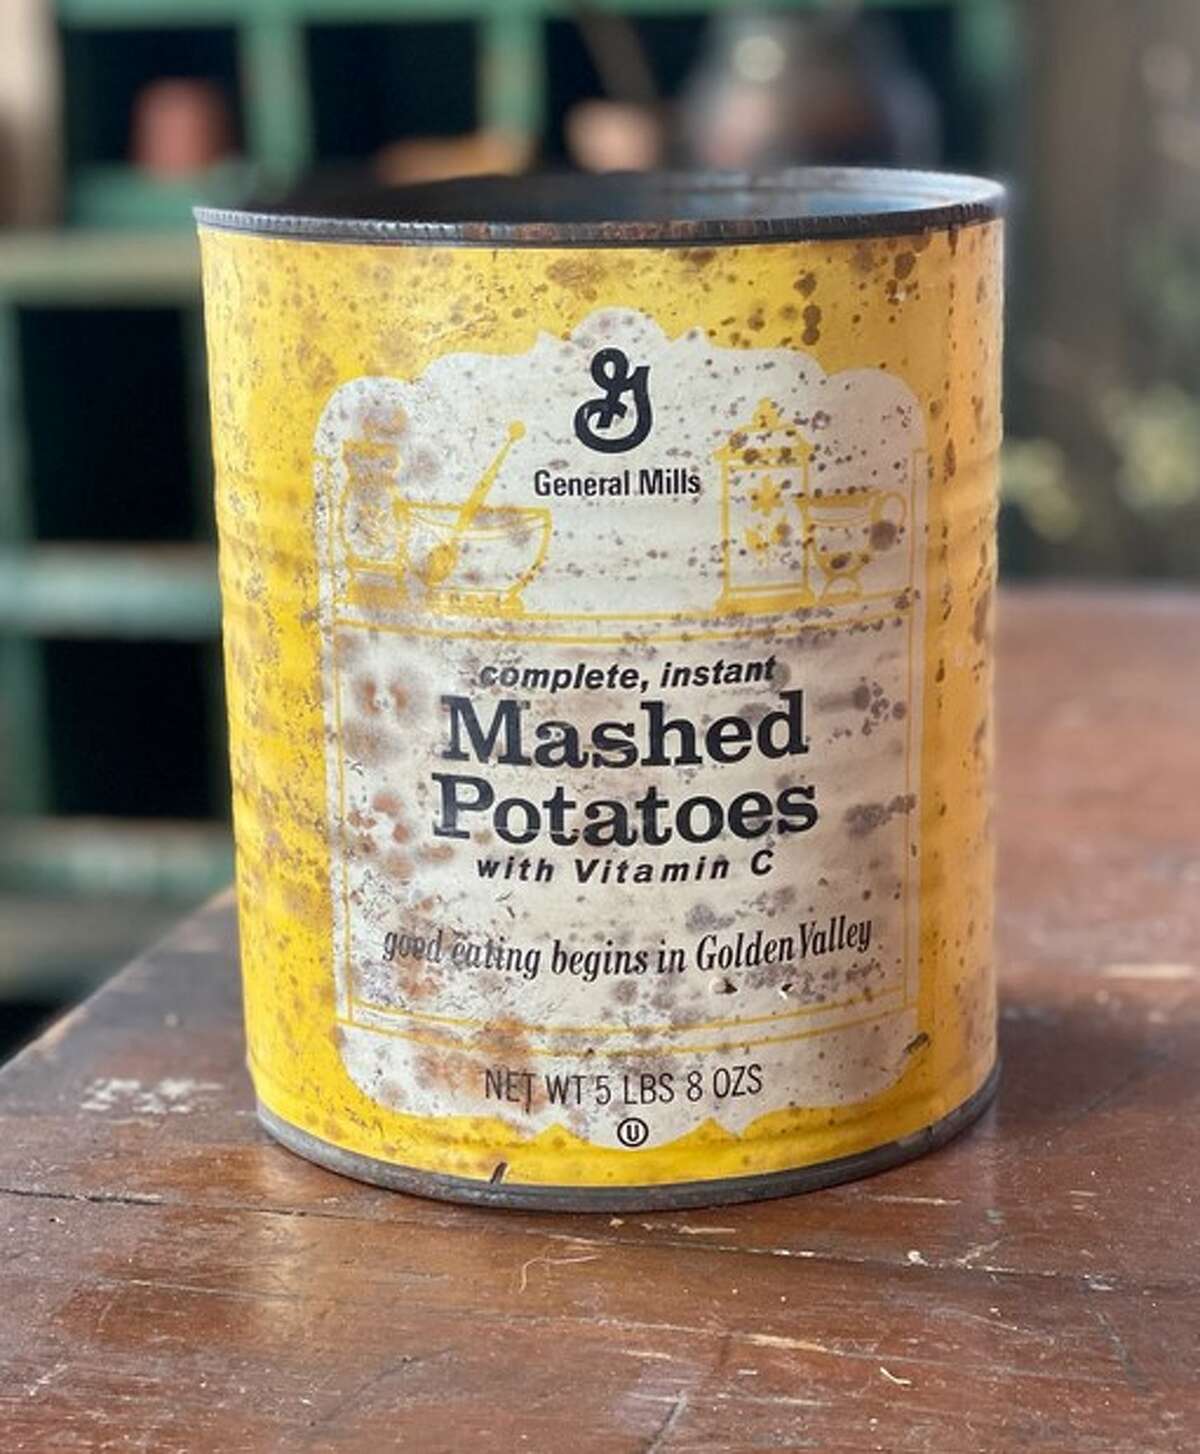 This vintage mashed potatoes tin is an example of merchandise sold at The Purple Ottoman in Bethalto.